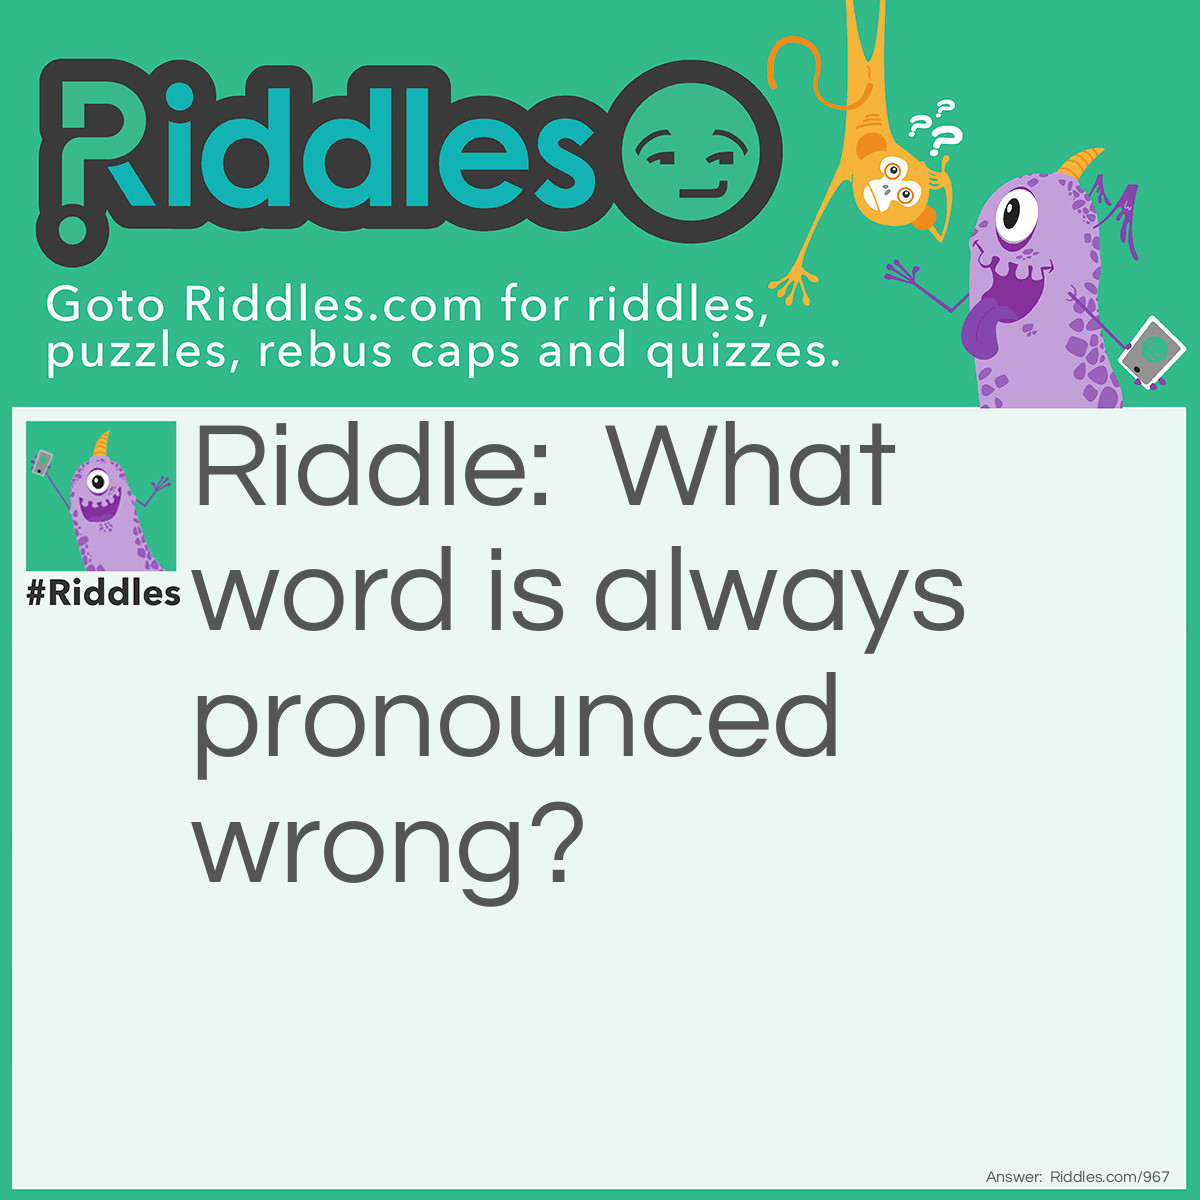 Riddle: What word is always pronounced wrong? Answer: Wrong!